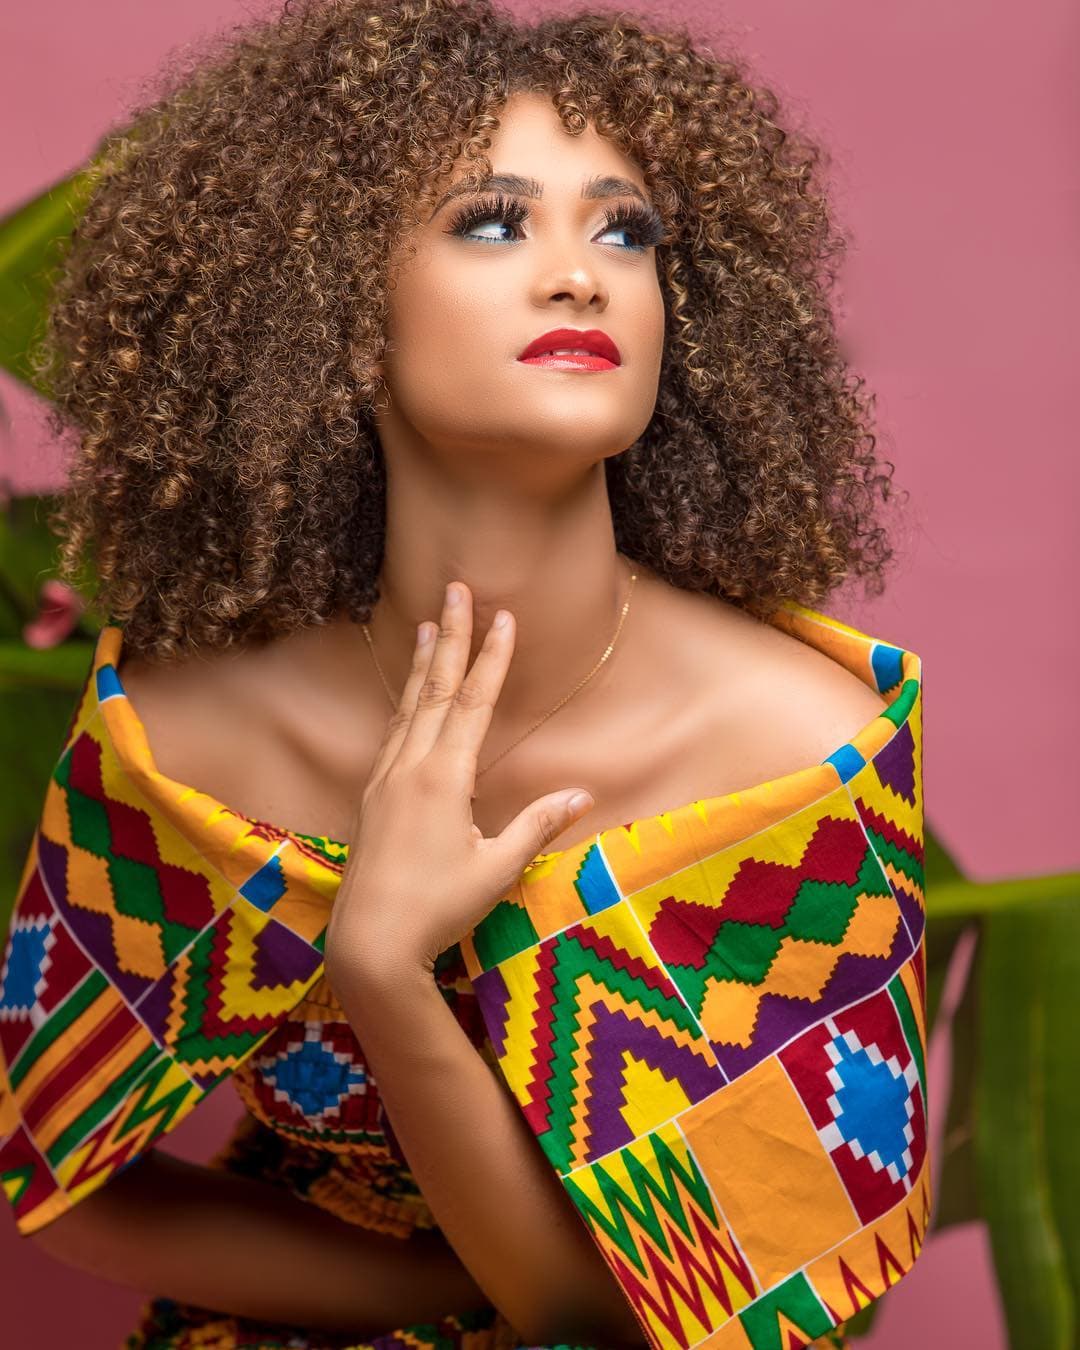 Beca Donald Knott dashes out in new kente photos